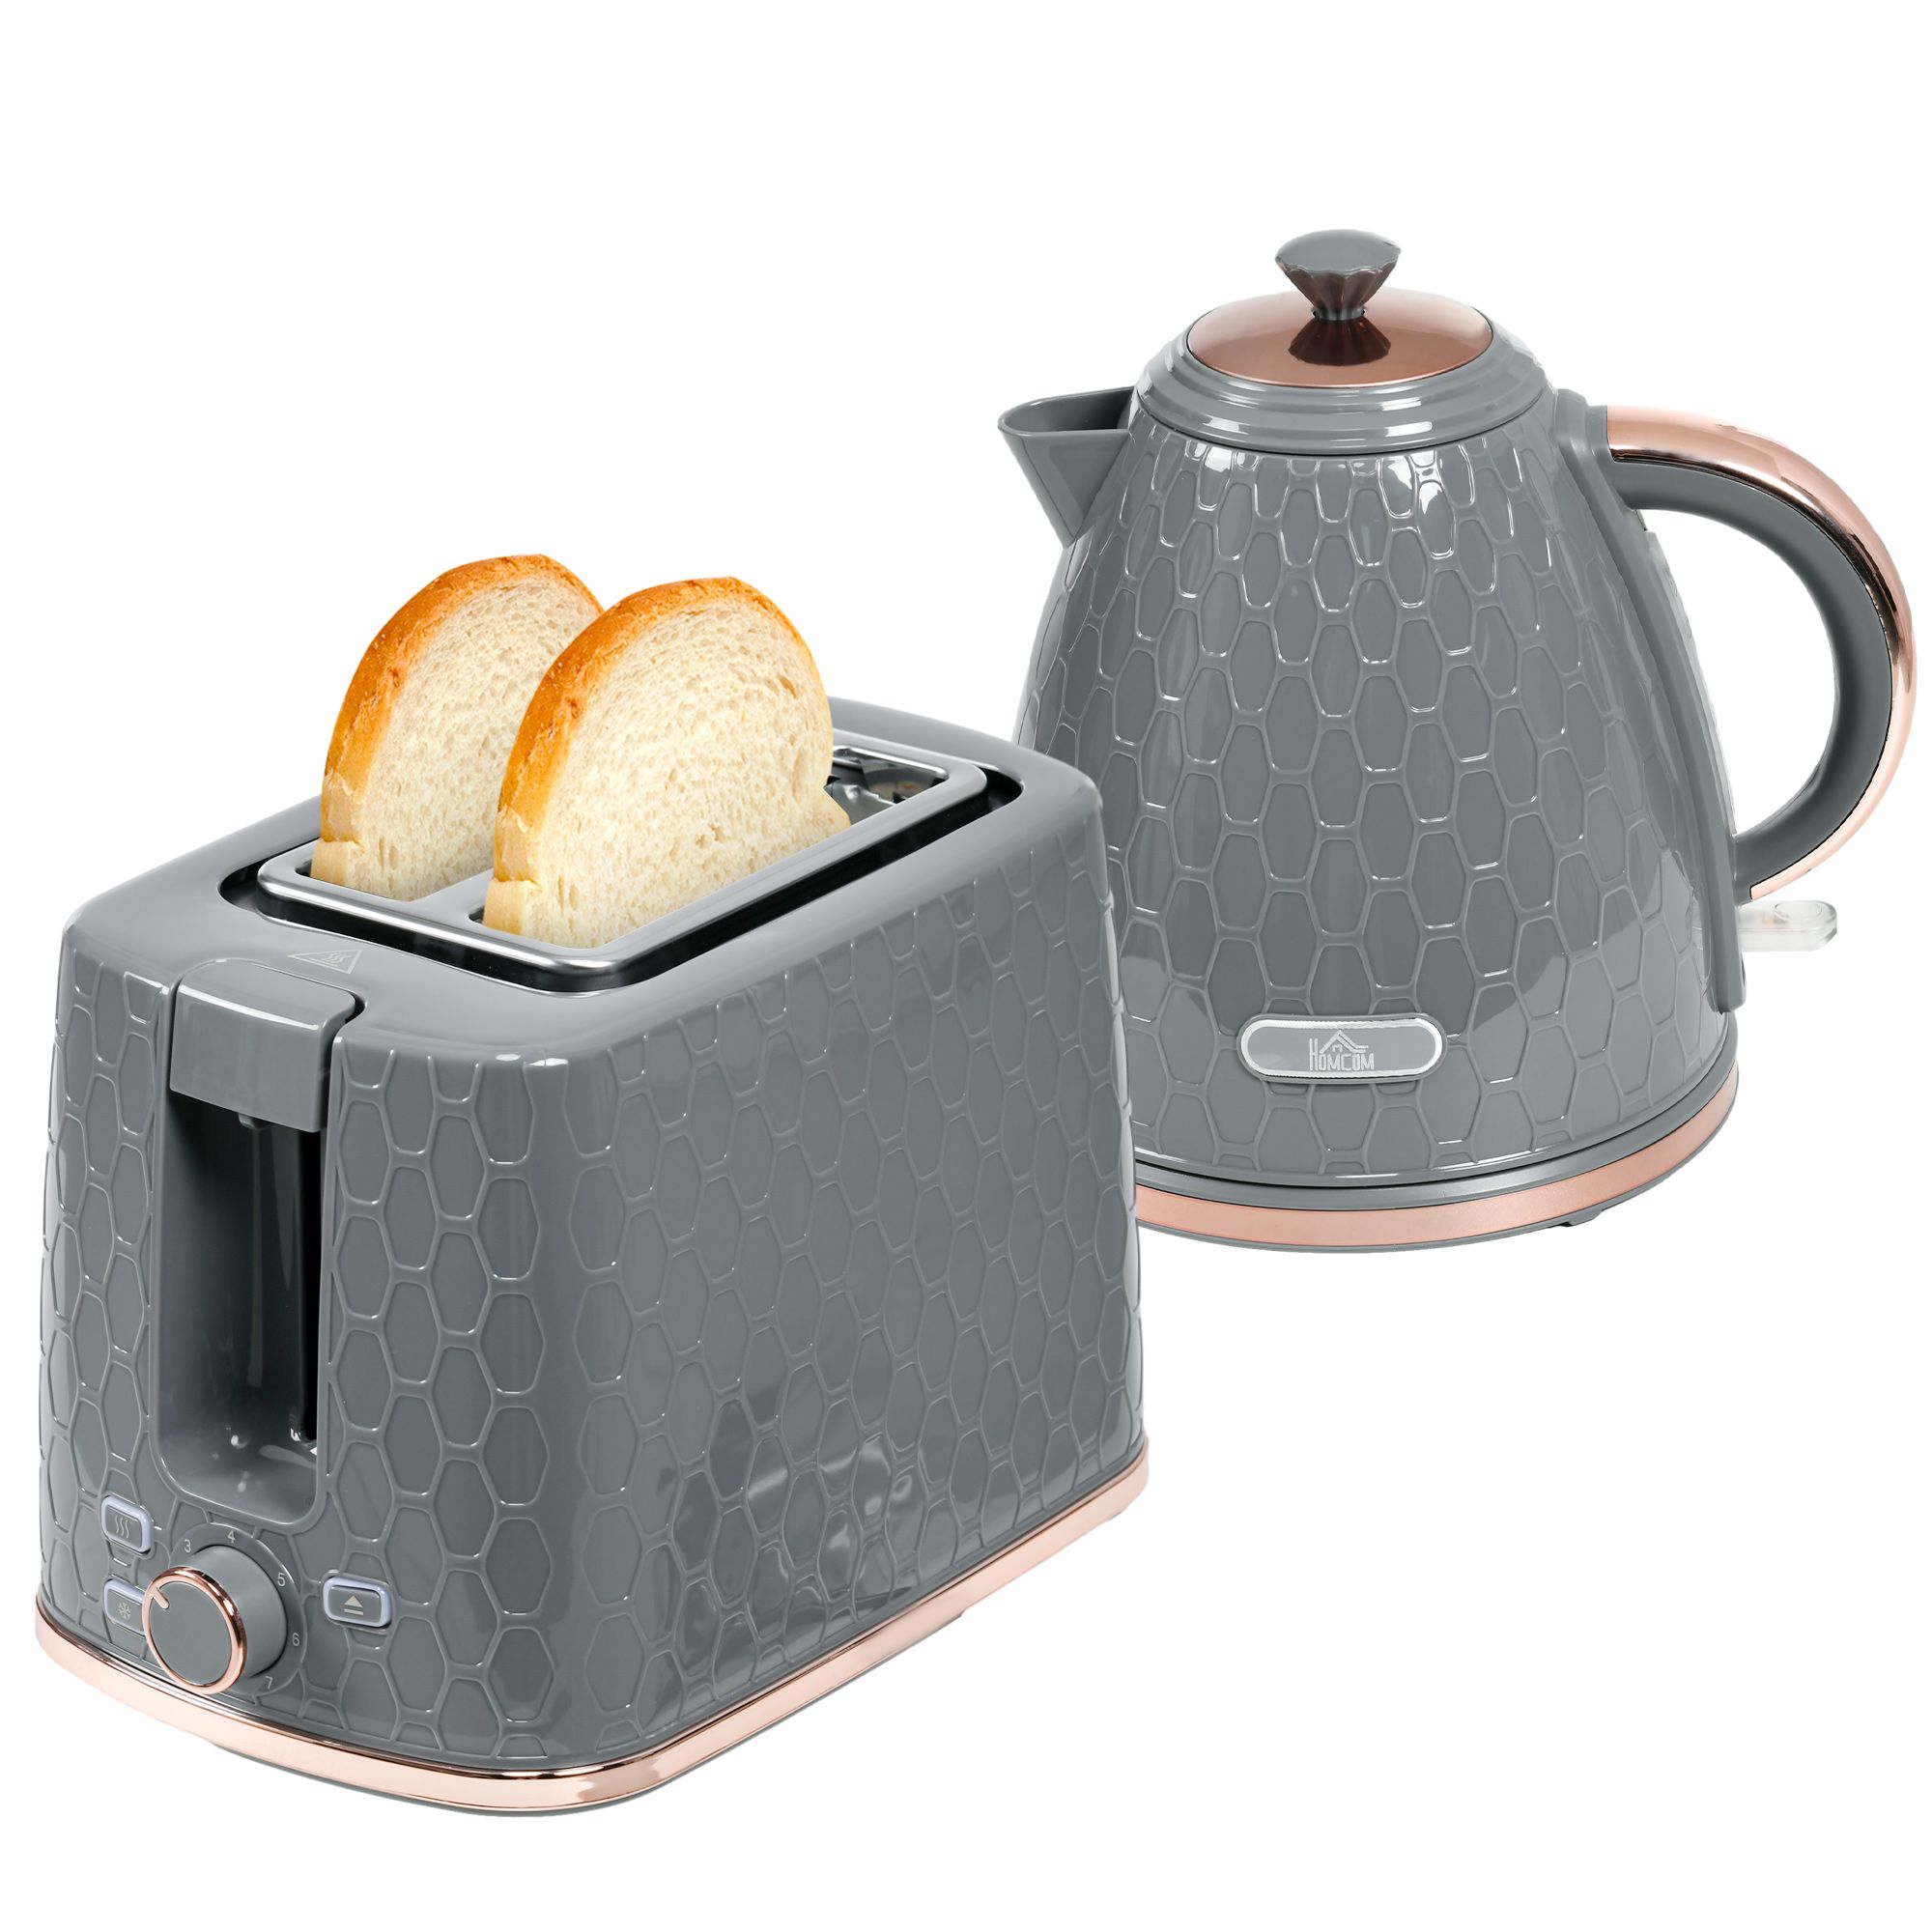 Homcom 1.7l 3000w Fast Boil Kettle & 2 Slice Toaster Set, Kettle And Toaster Set With Auto Shut Off, Browning Controls, Grey